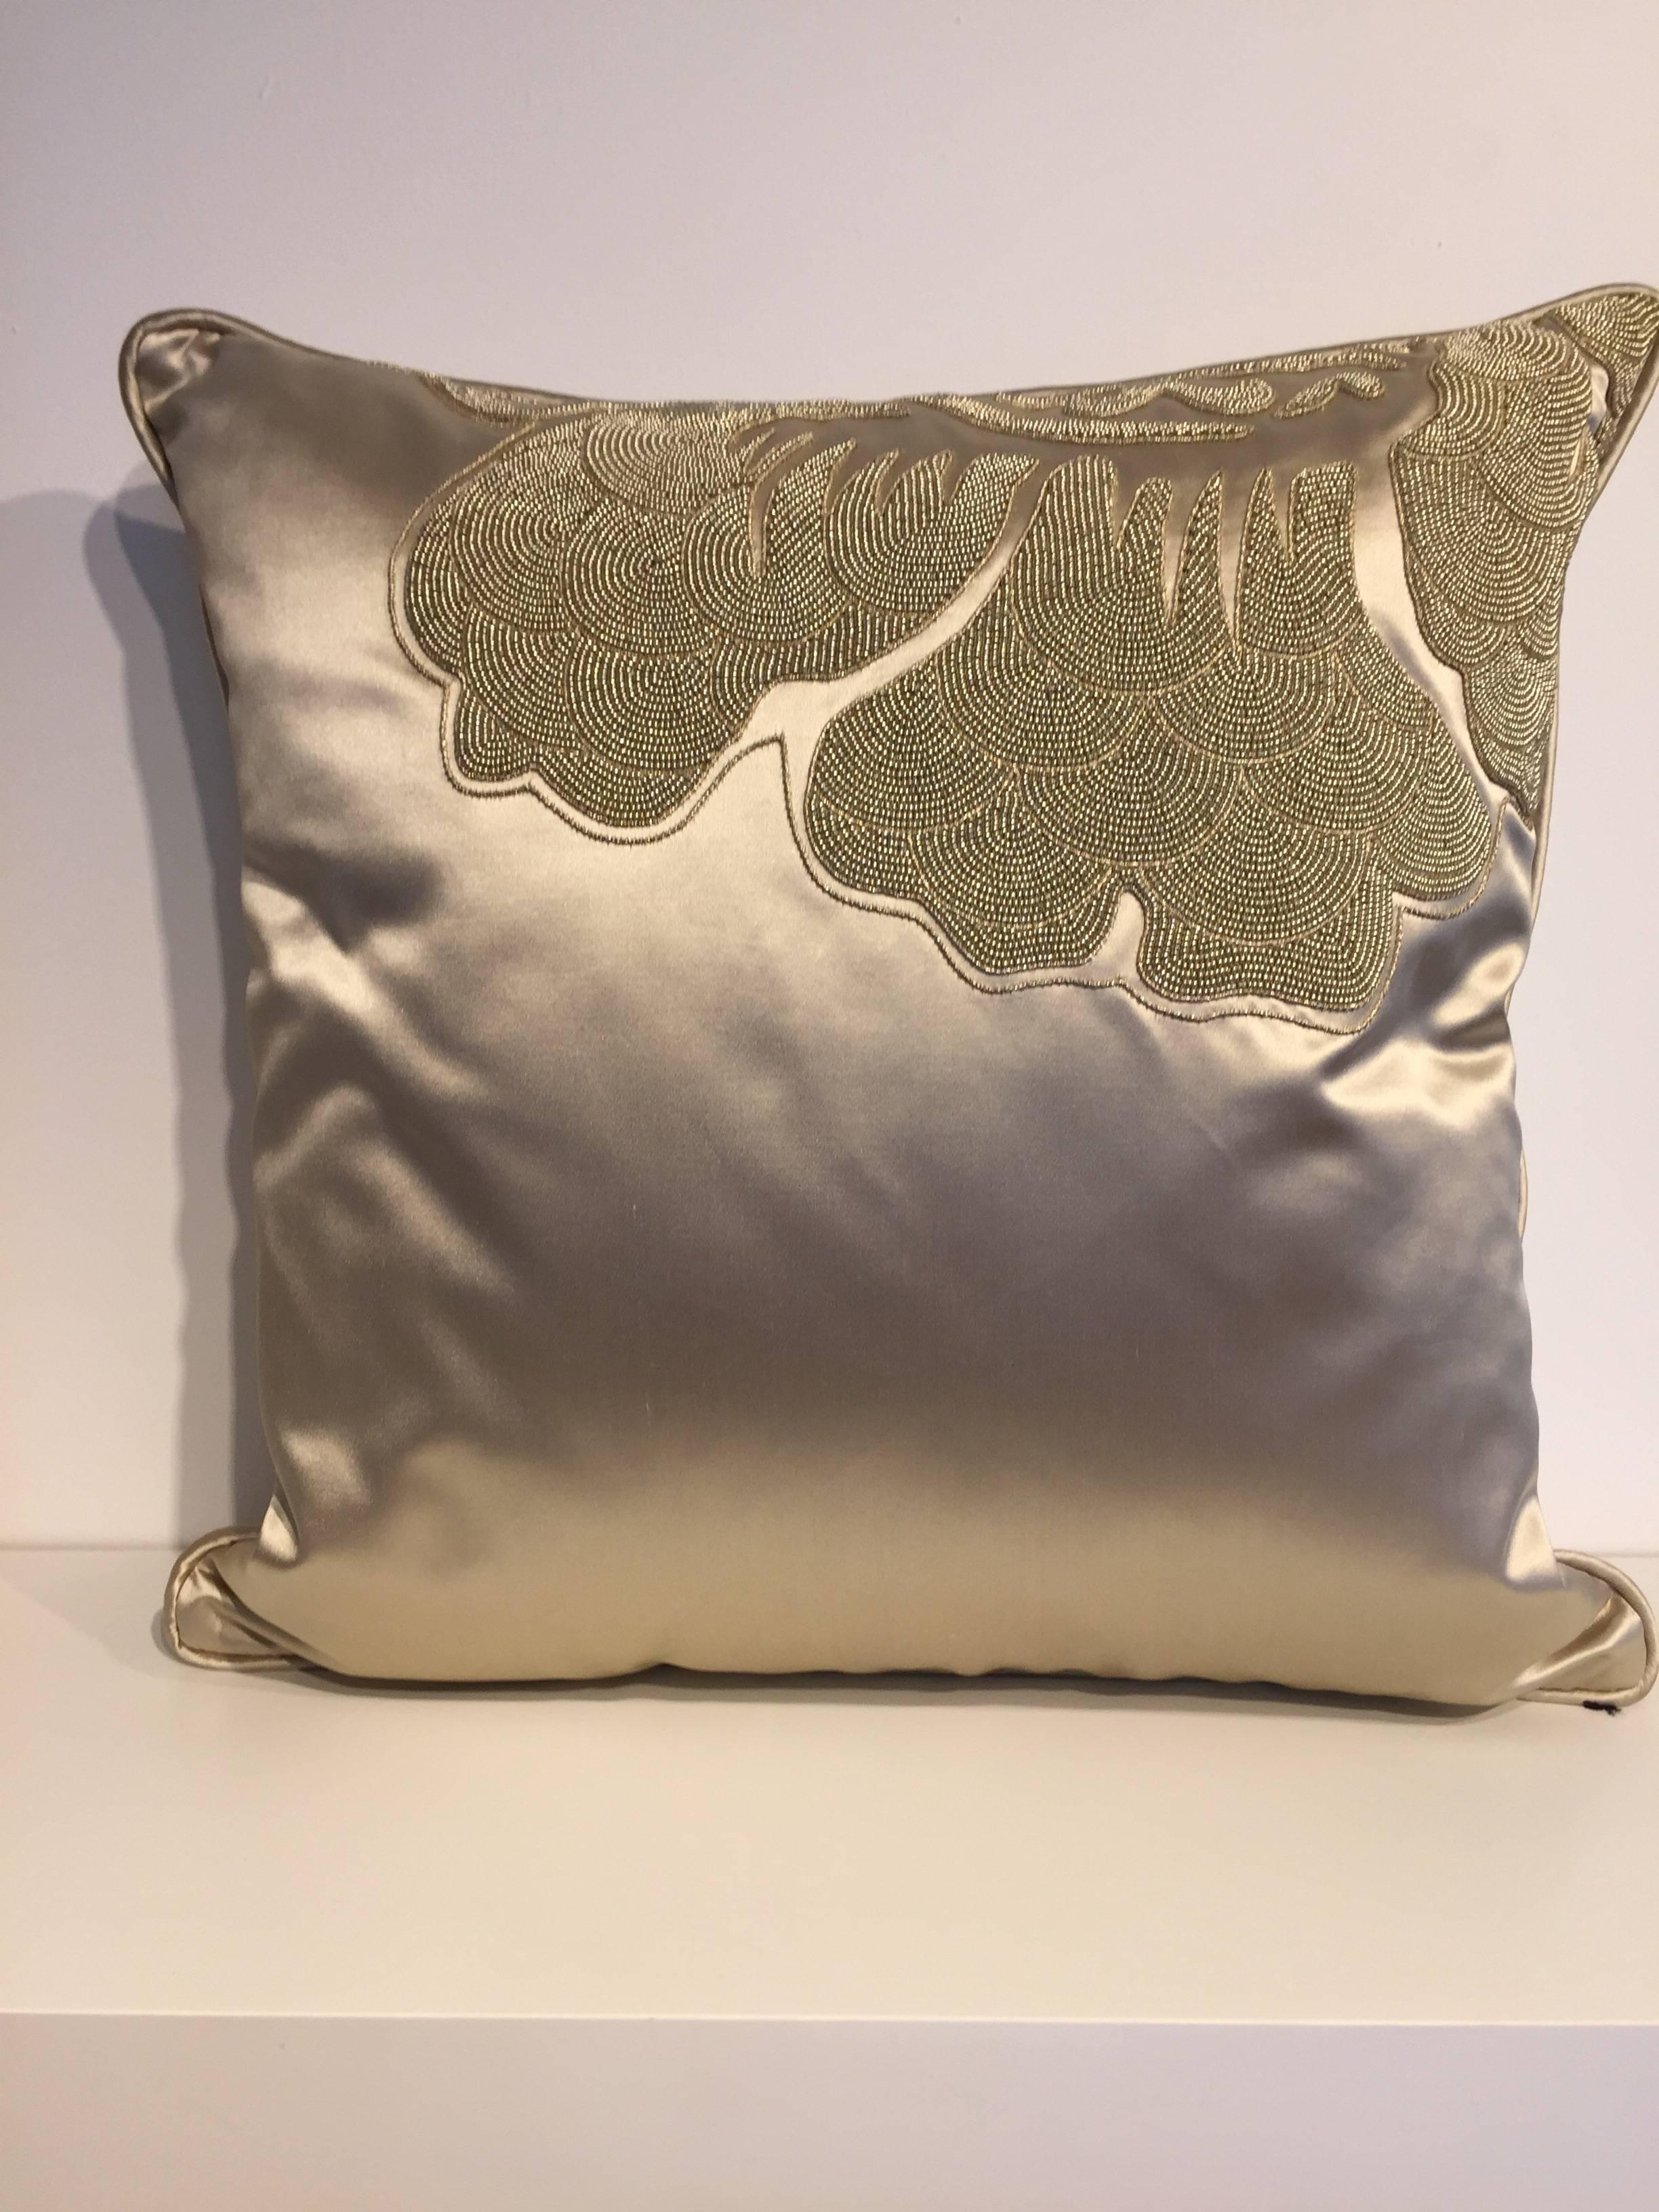 Set of three no cushions, silk satin Osborn and little Kederi silk F5750/07 col. champagne, hand embroidery with cord work and beading, cushion size 40 x 40 cm, Self-piped, back side plain silk, cushion cover with cotton lining, concealed zipper in